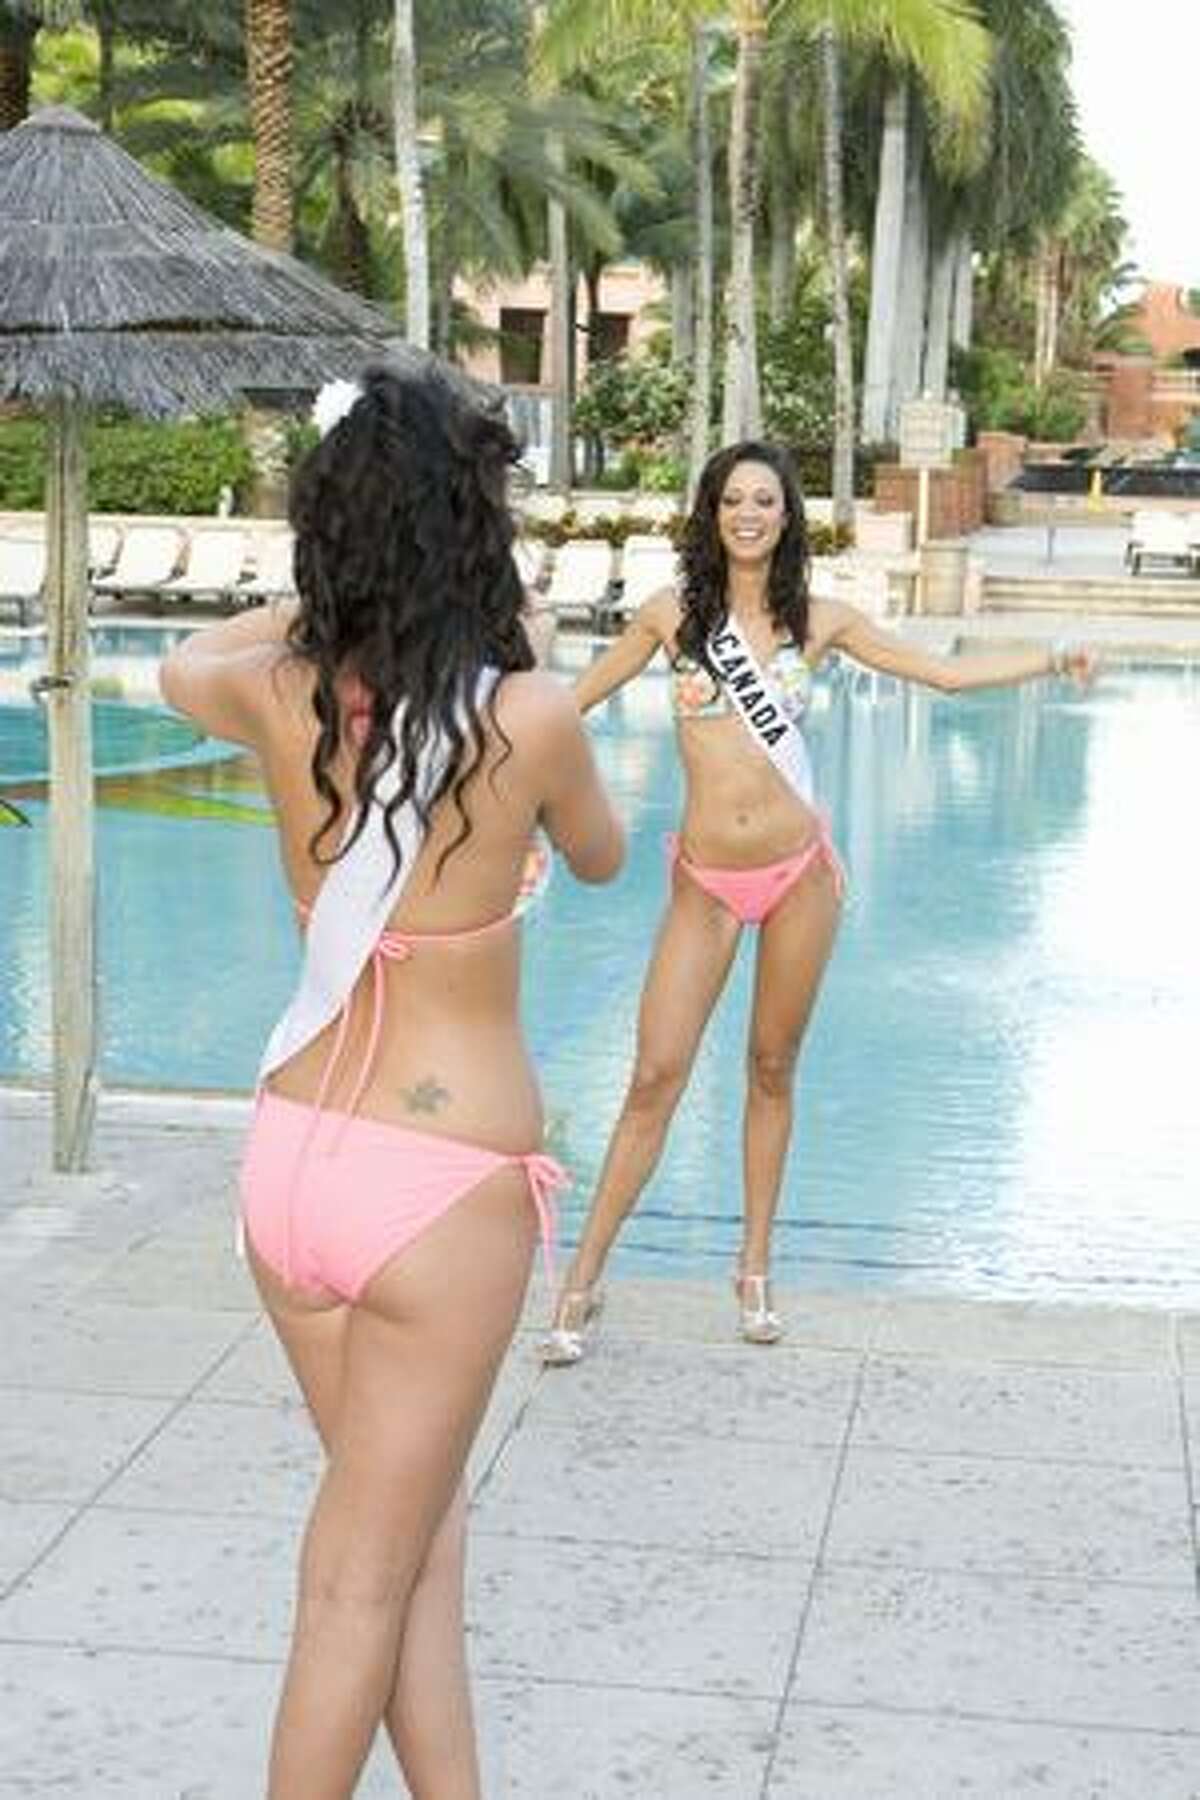 Dominique Peltier, Miss Bolivia, takes a photo of Mariana Valente, Miss Canada, at the Atlantis resort, headquarters for the pageant.